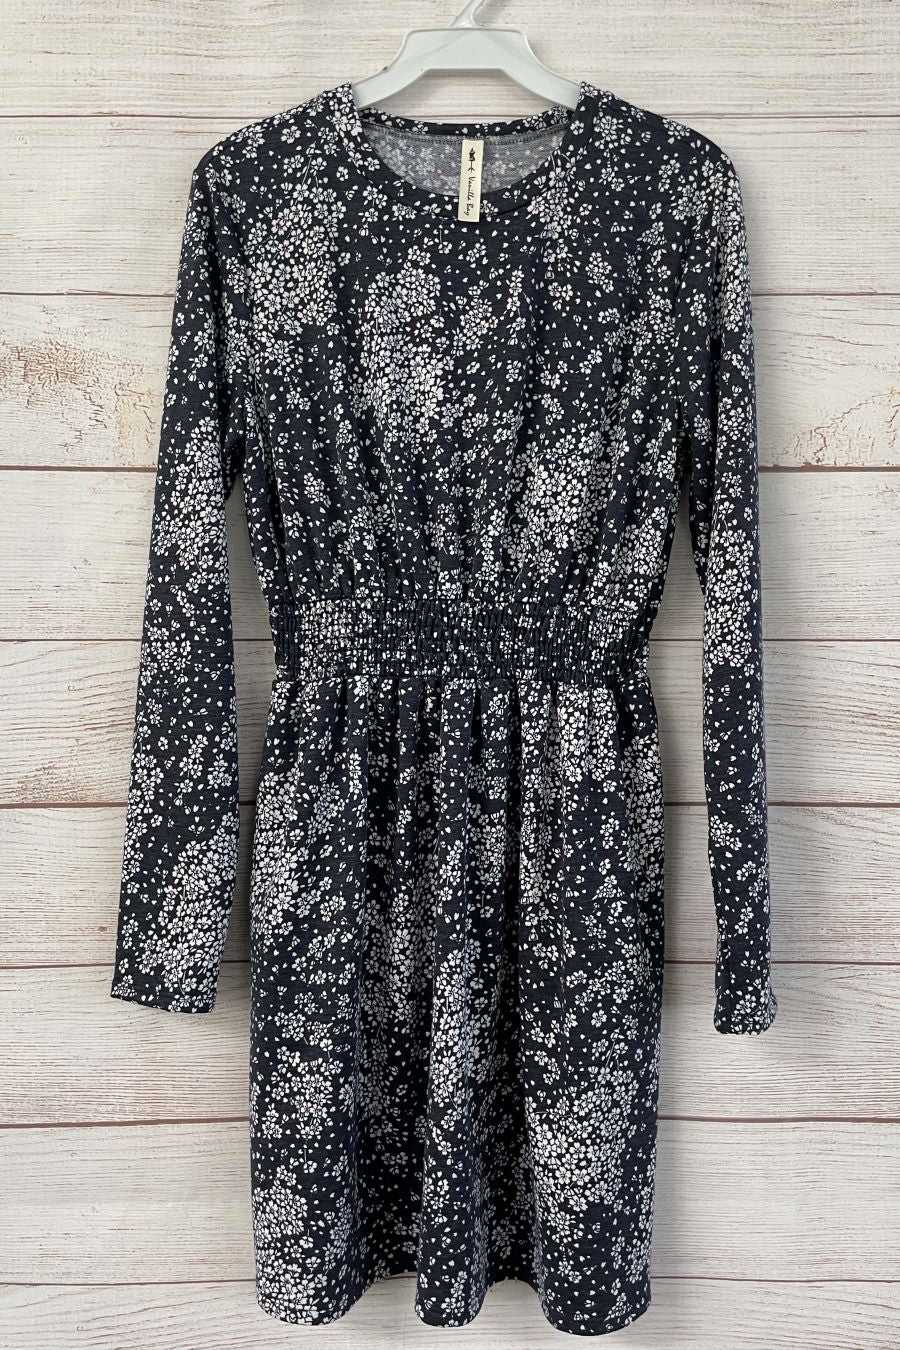 VD42109NVY French Terry Floral Knit Dress with Pockets - Navy